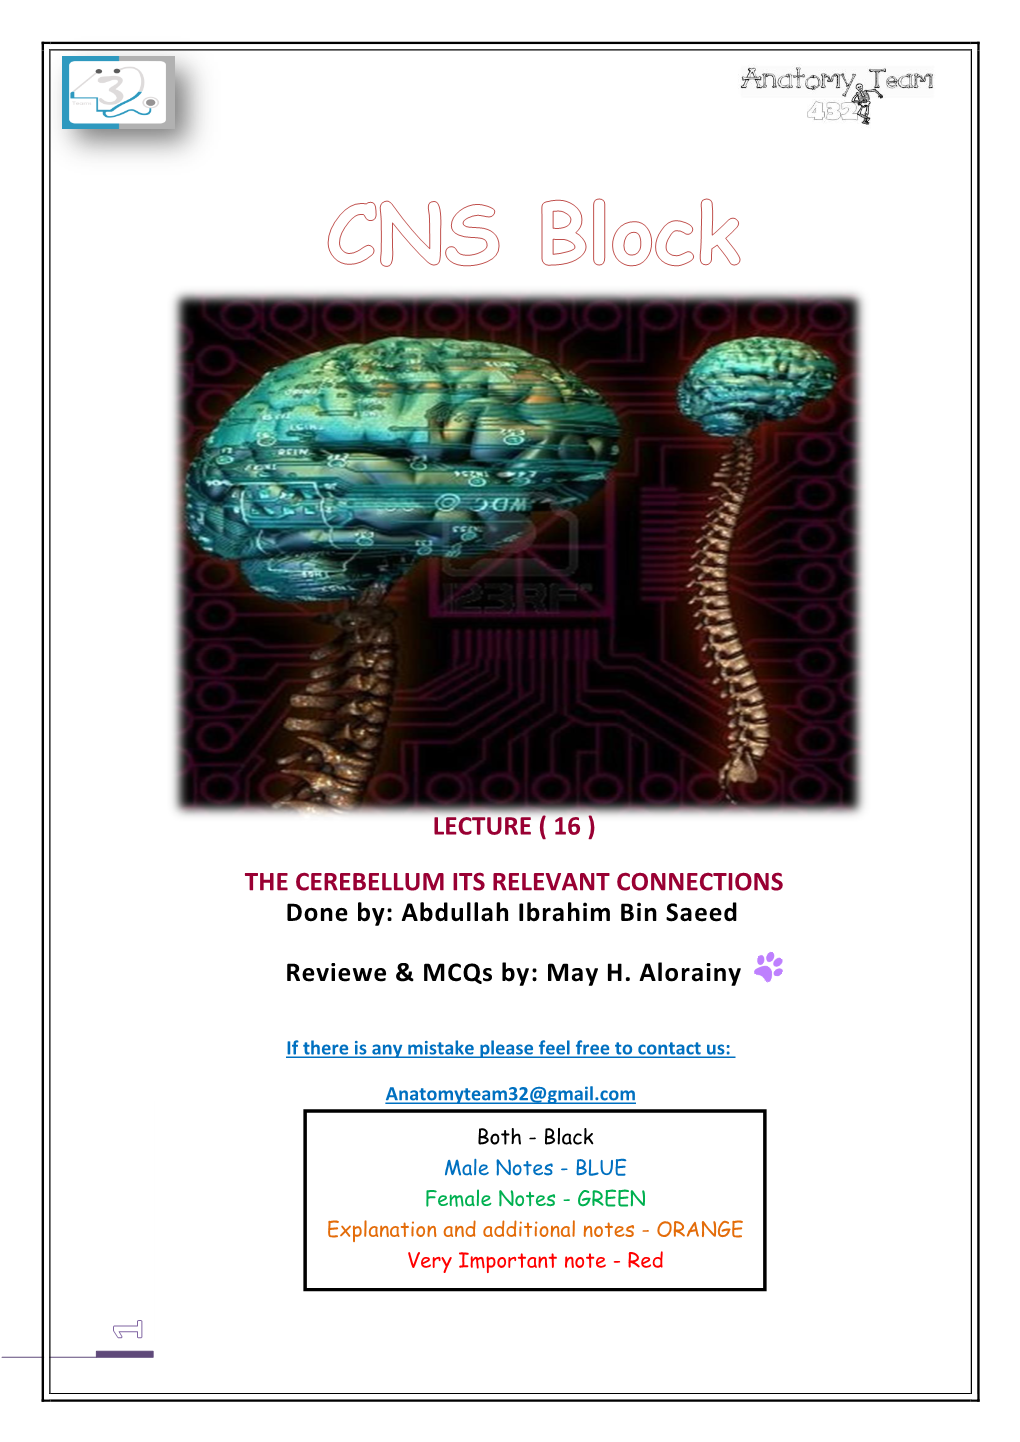 THE CEREBELLUM ITS RELEVANT CONNECTIONS Done By: Abdullah Ibrahim Bin Saeed